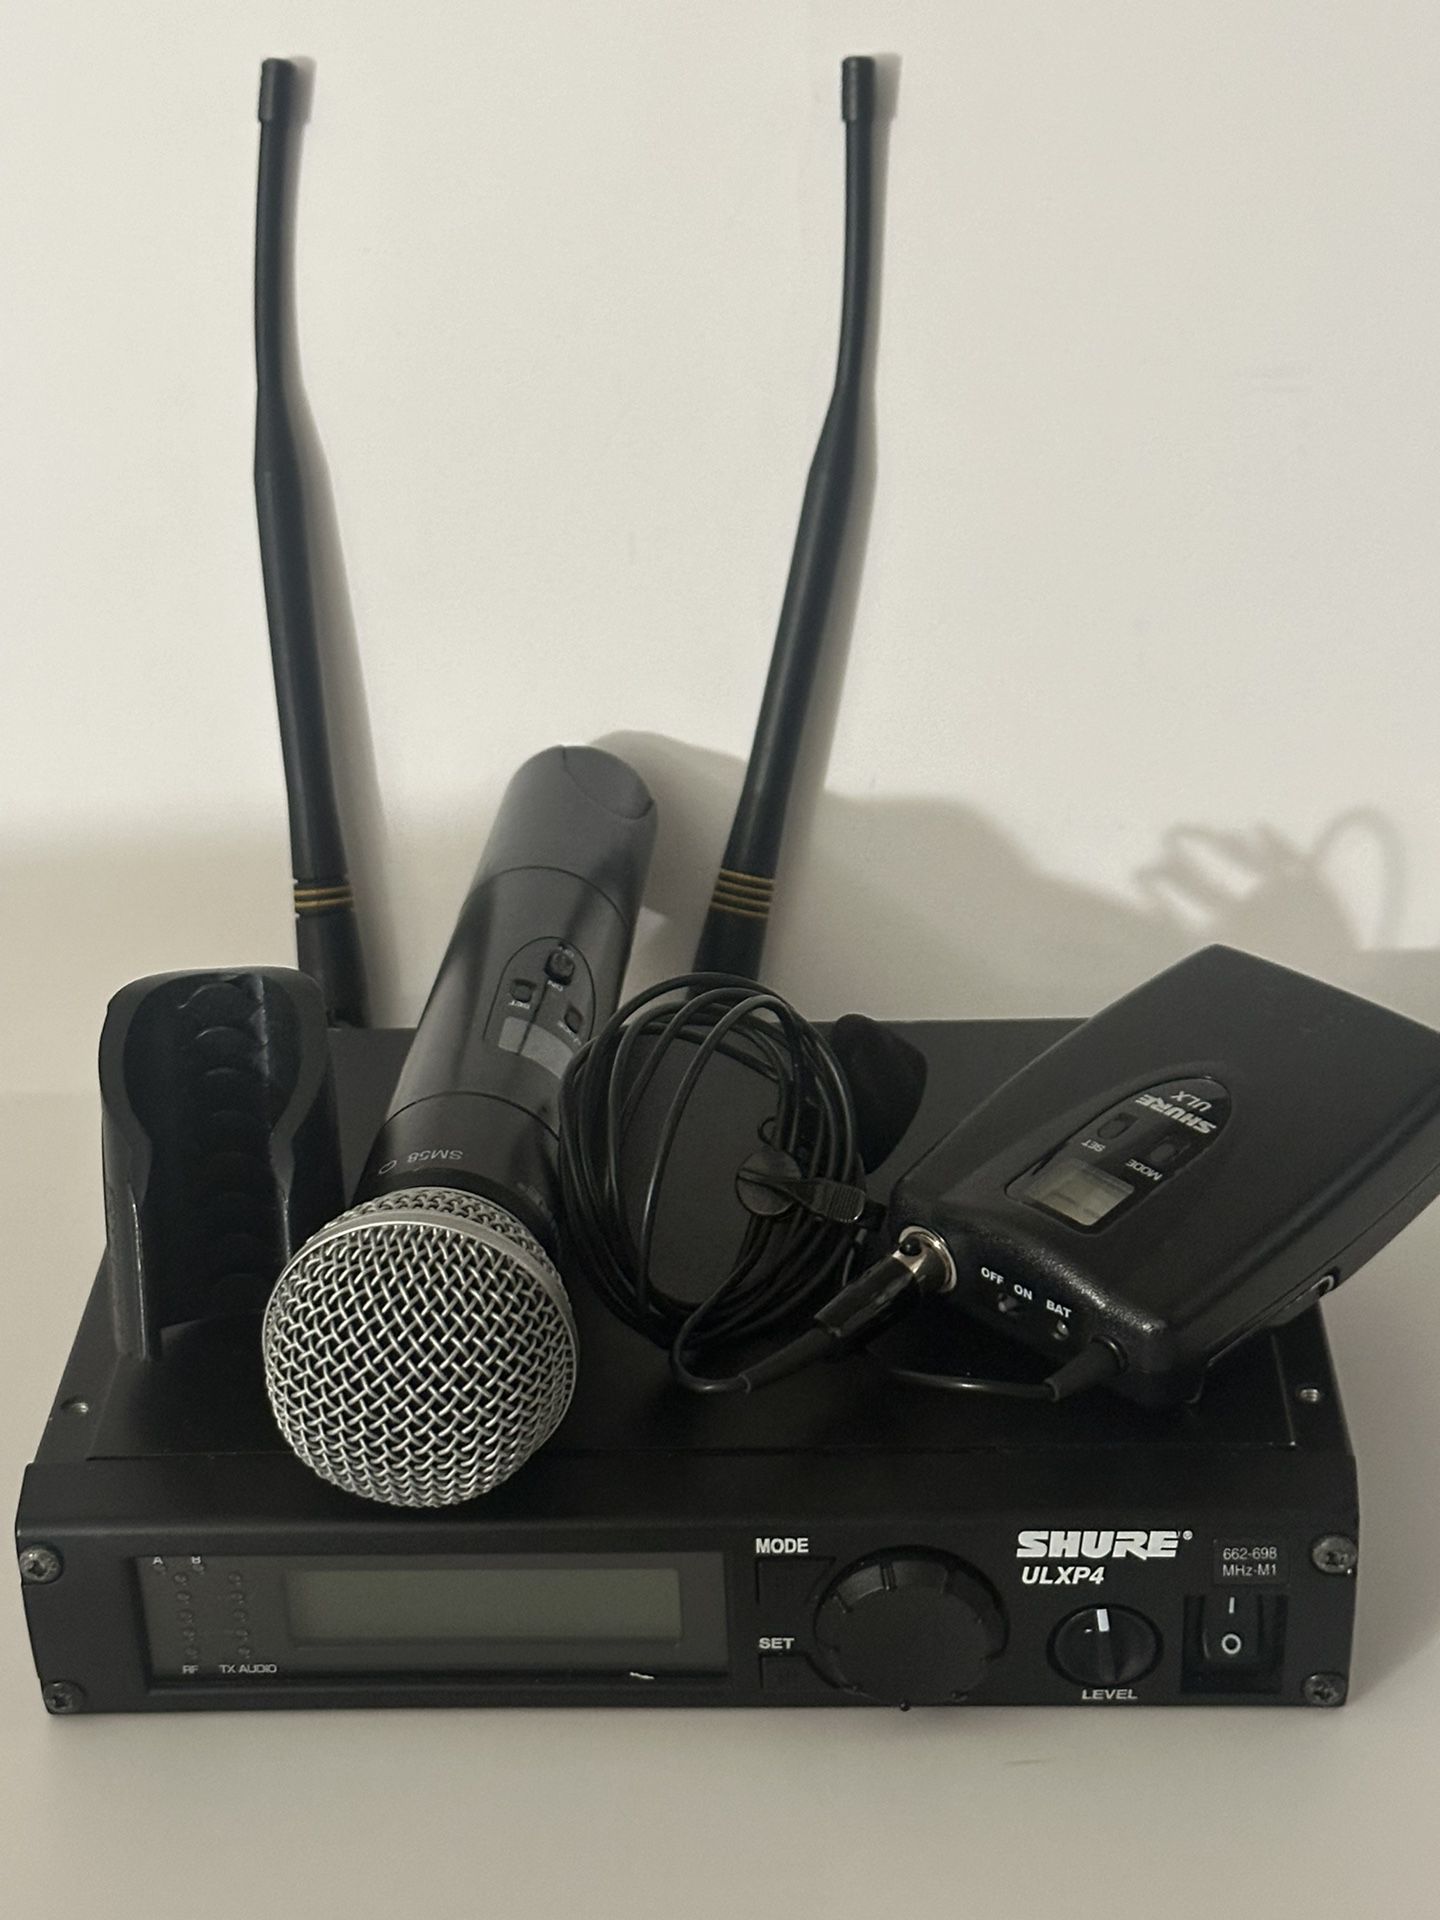 Shure Wireless Two Chanel Microphone With Hand Held Mic And Waiste Mic 